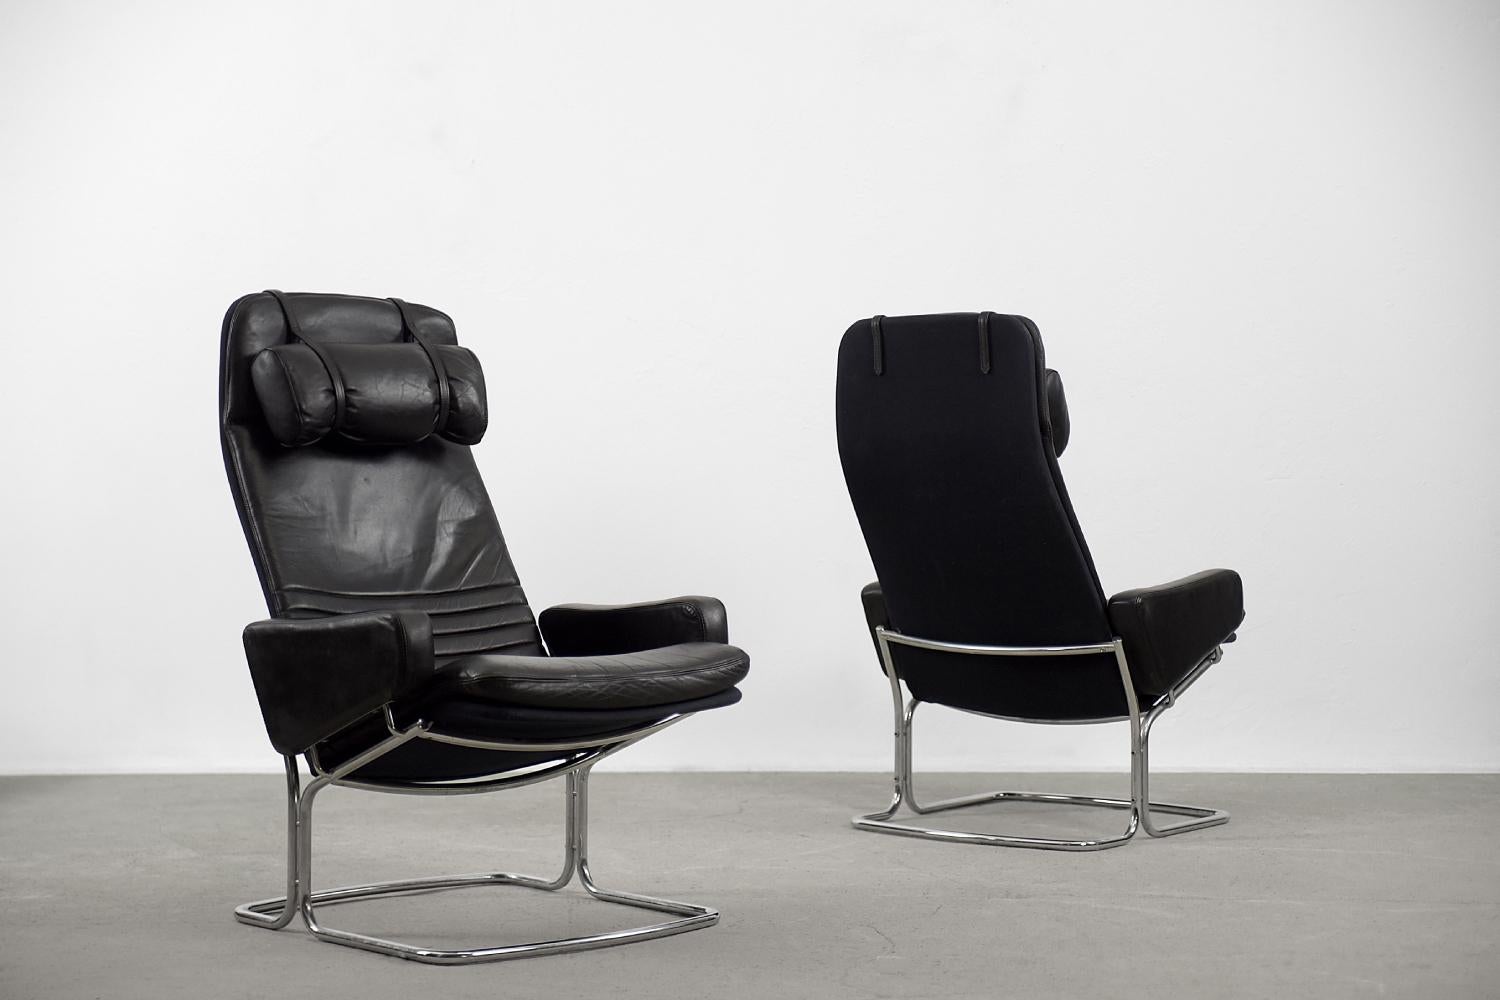 Pair of Vintage Scandinavian Modern Black Leather Armchairs from Ire Möbel AB For Sale 4